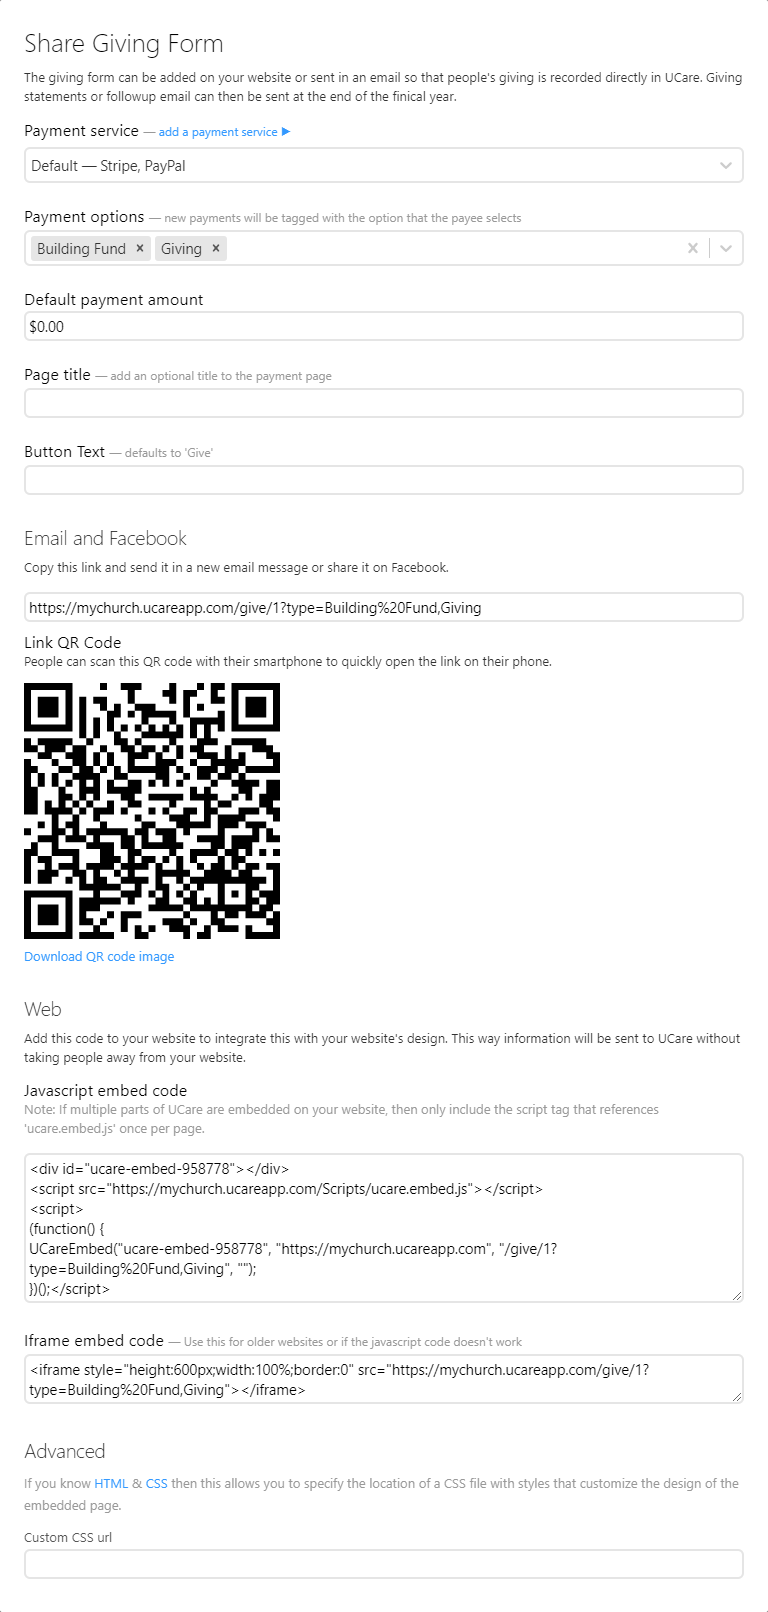 payment-list-share.png